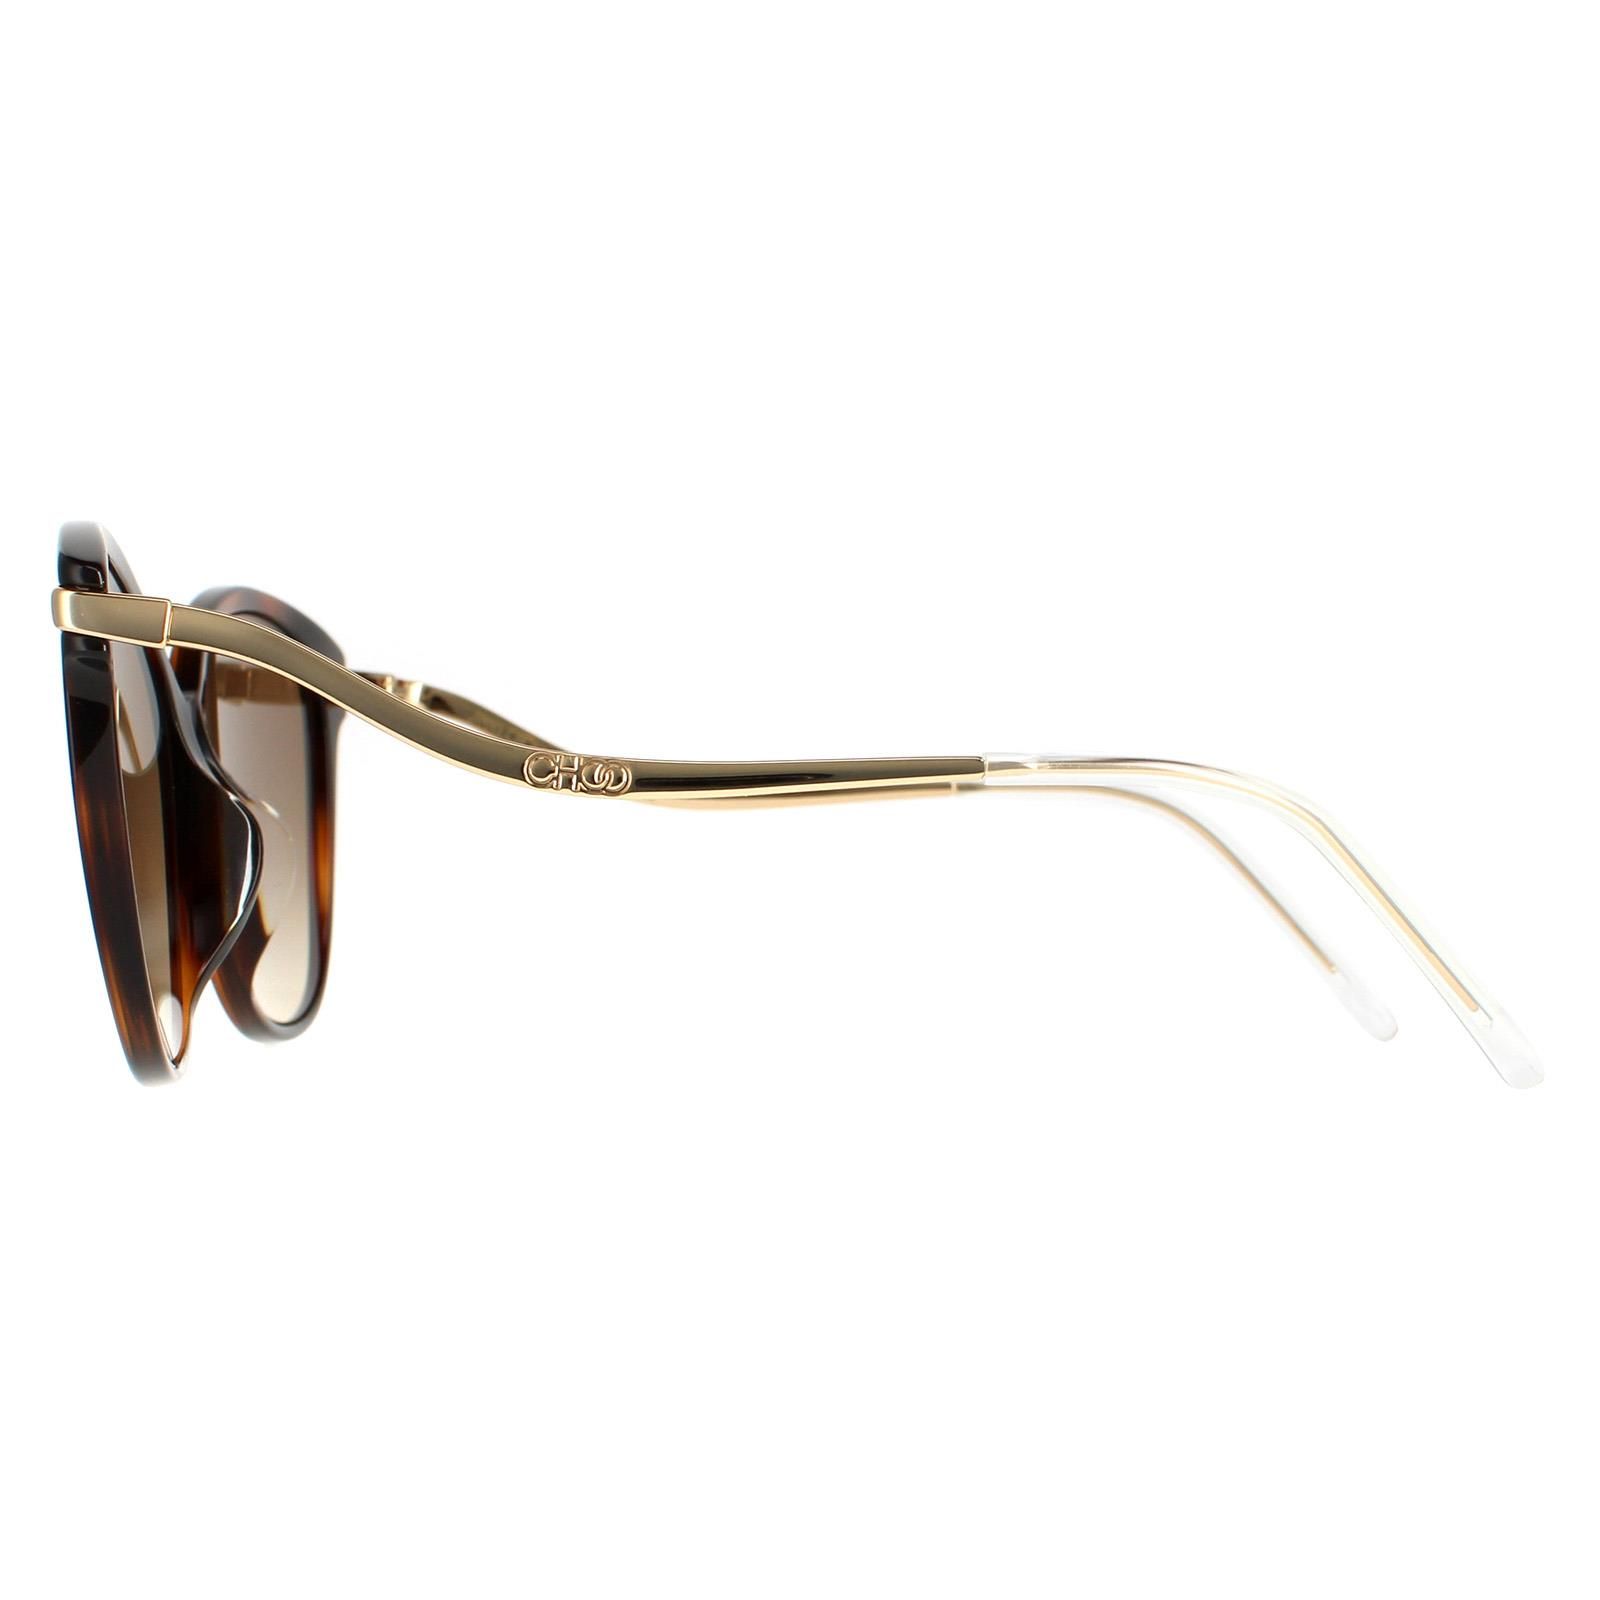 Jimmy Choo CatEye Womens Glitter Havana Brown Gradient Peg/F/S  Jimmy Choo are a cat eye style crafted from lightweight acetate. The Jimmy Choo logo is engraved into the wavy designed temples for brand authenticity